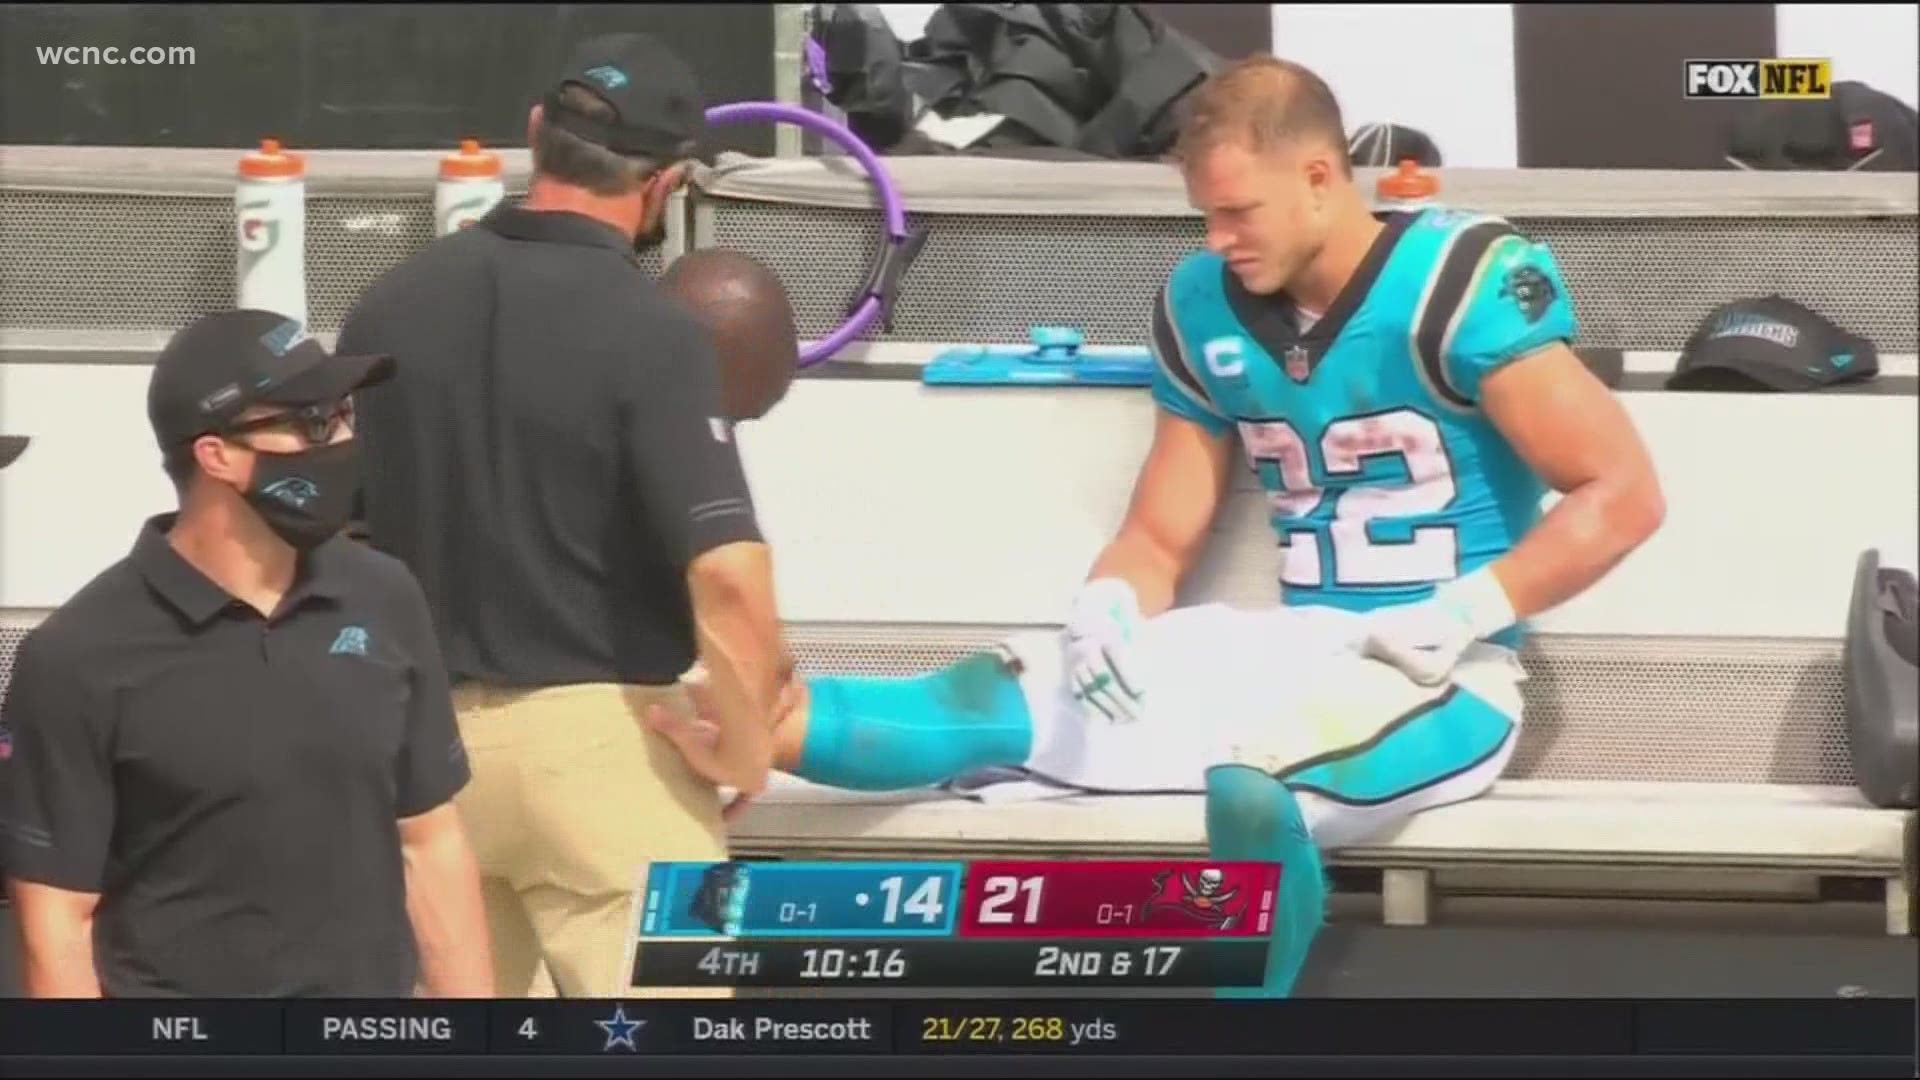 Carolina Panthers running back Christian McCaffrey will have an MRI on his ankle, according to a report from NFL Network's Ian Rapoport.